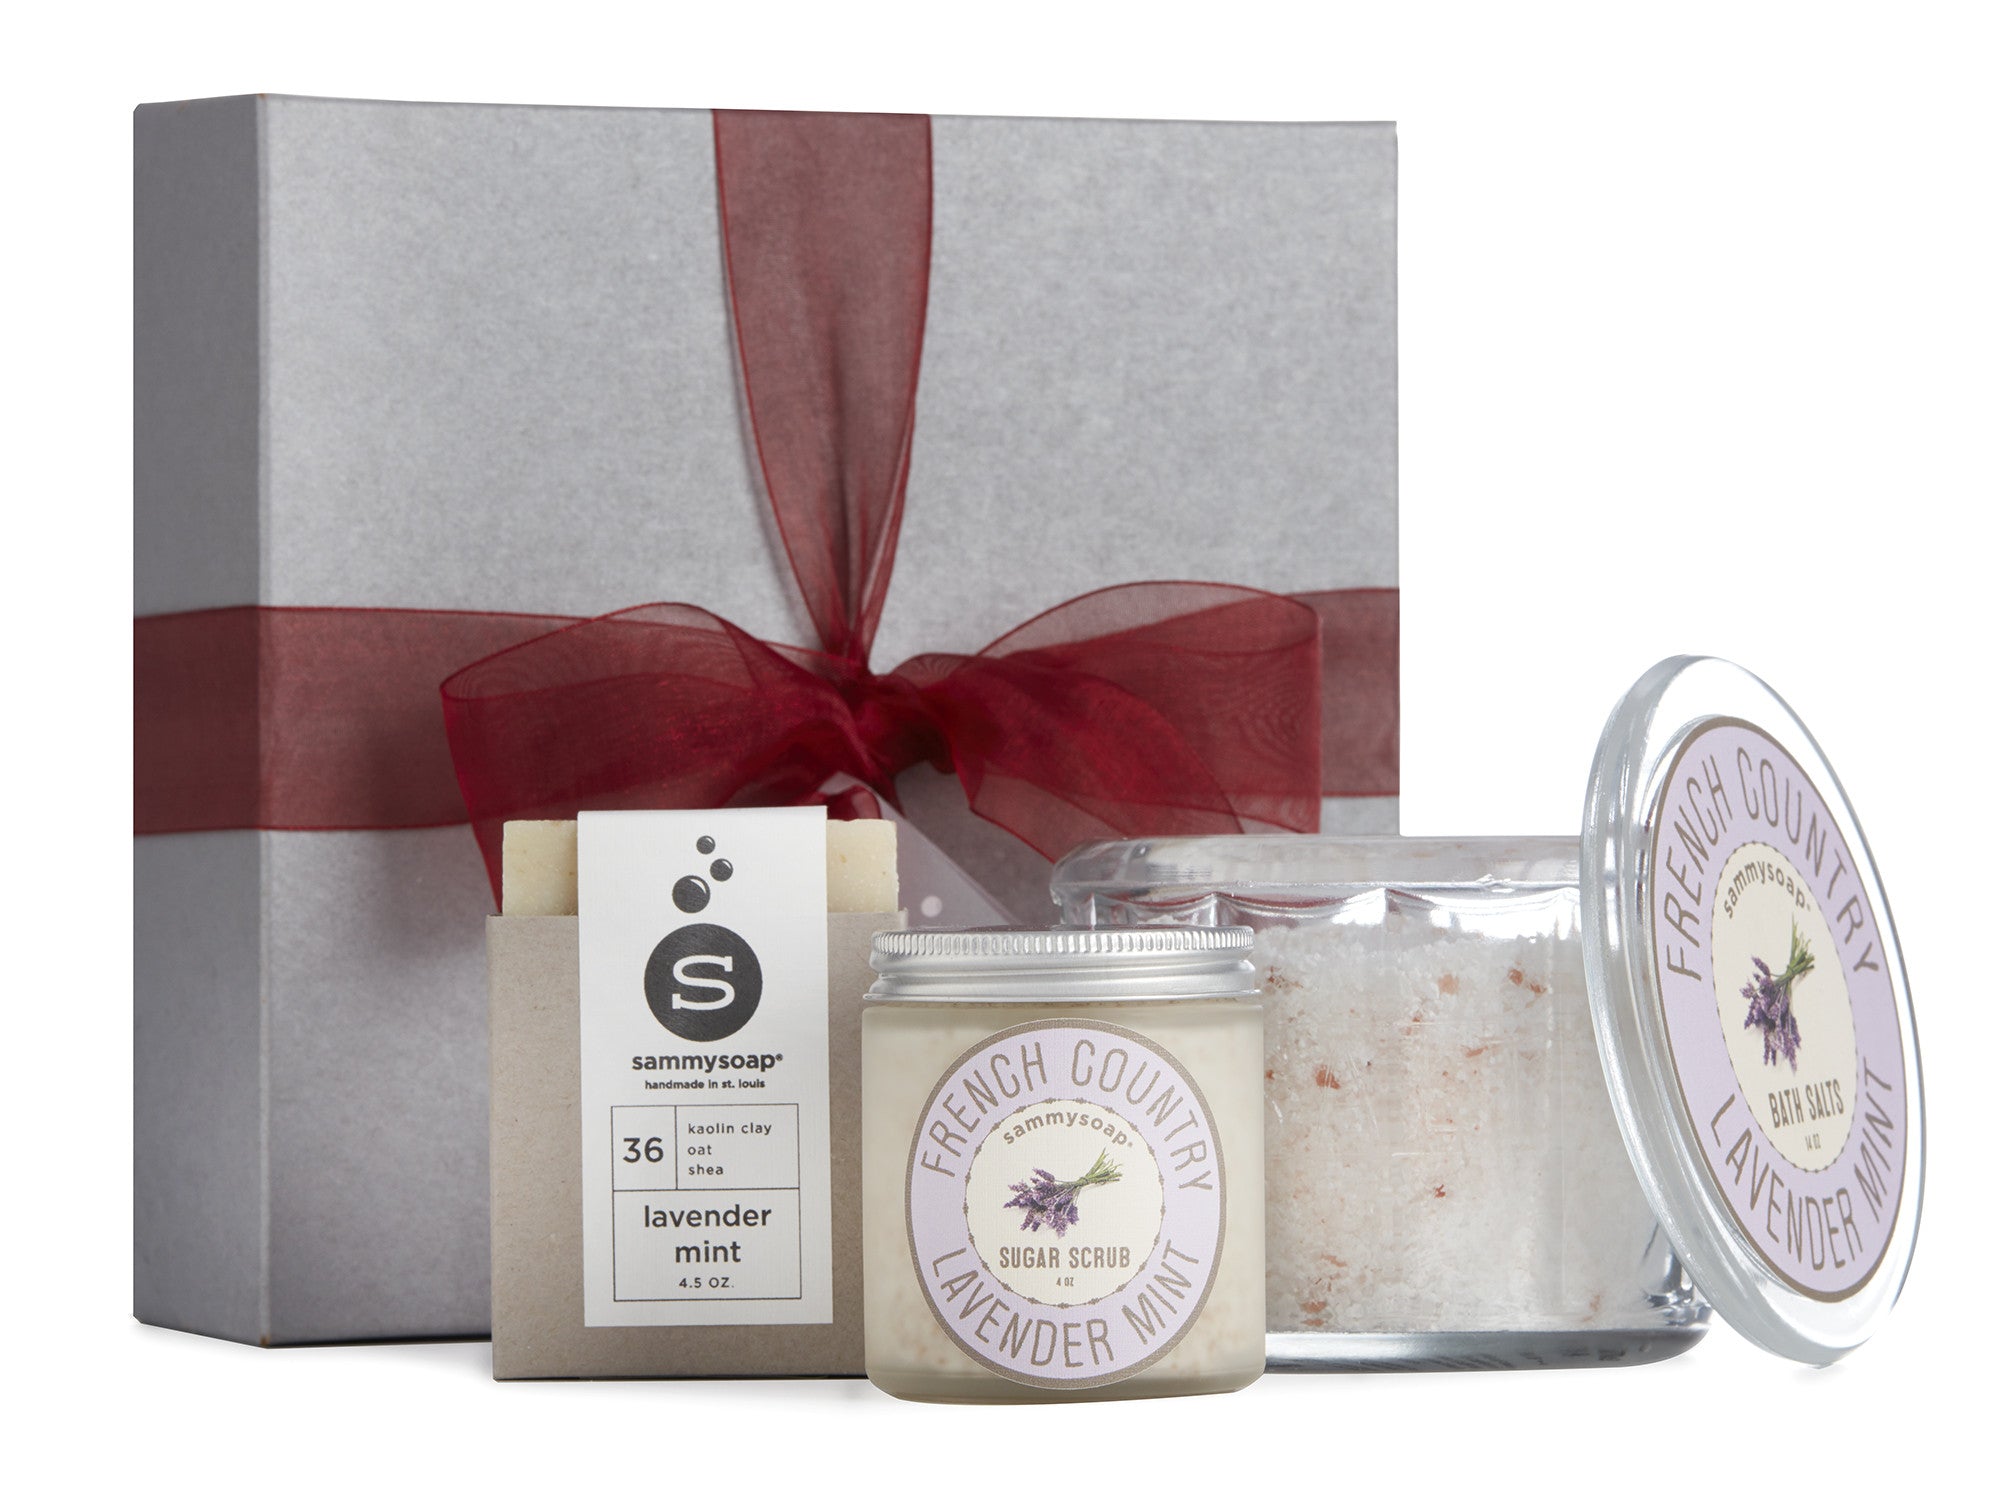 French Country Lavender Mint Collection Gift Box: Body Polish, Bath Salts, and All Natural Soap